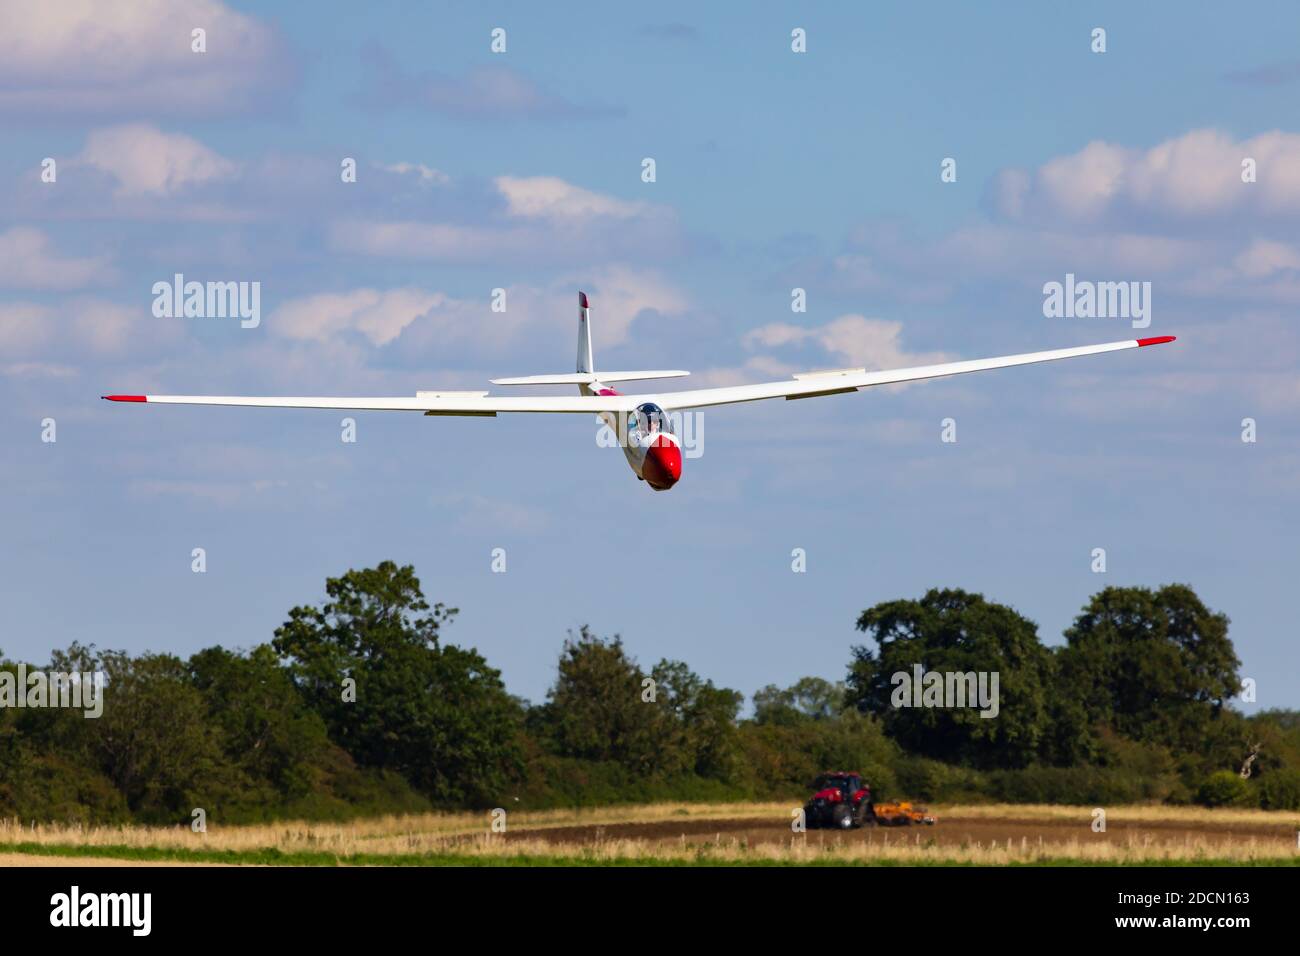 ASK8 Glider on approach over farm fields, at Buckminster Gliding Club, Saltby, Saltby Airfield, Sproxton Road, SKILLINGTON, GRANTHAM, NG33 5FE, Englan Stock Photo